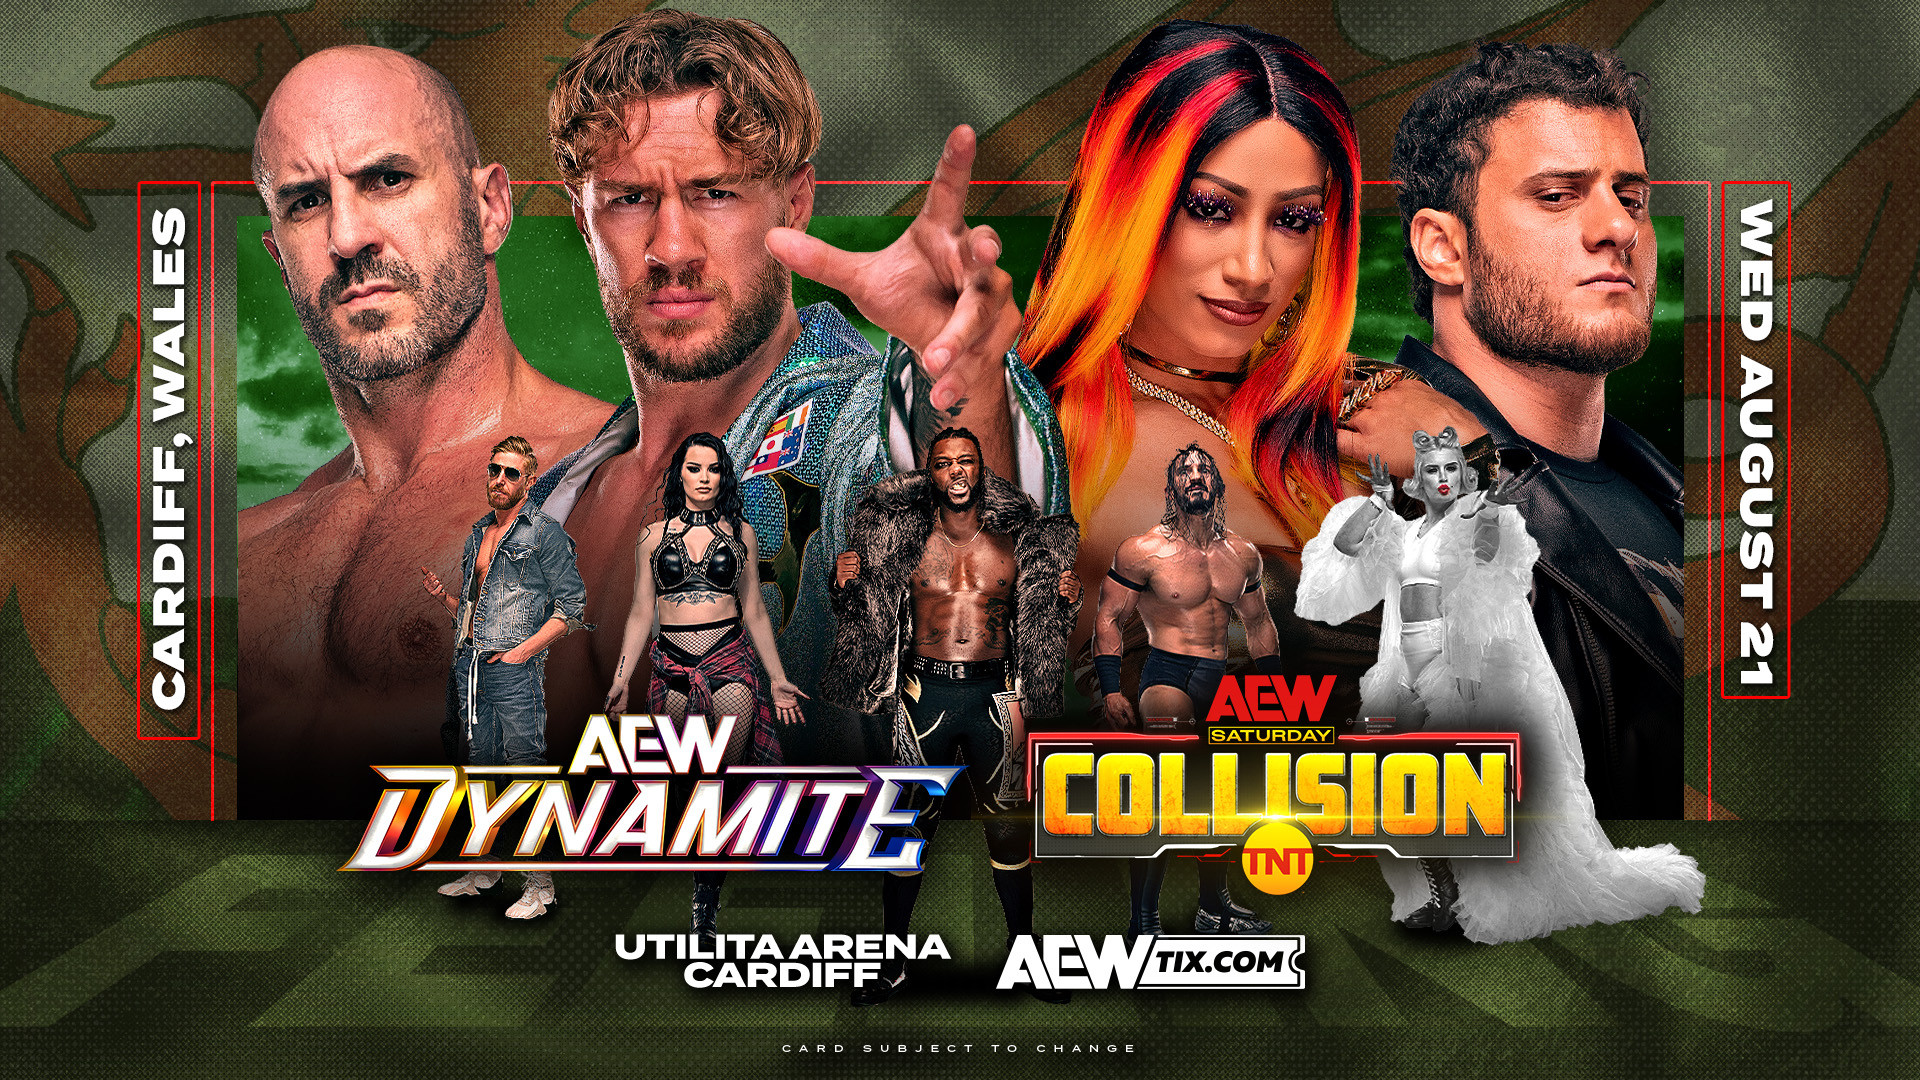 AEW: Dynamite and AEW: Collision To Make United Kingdom Debuts At Utilita Arena Cardiff On August 21